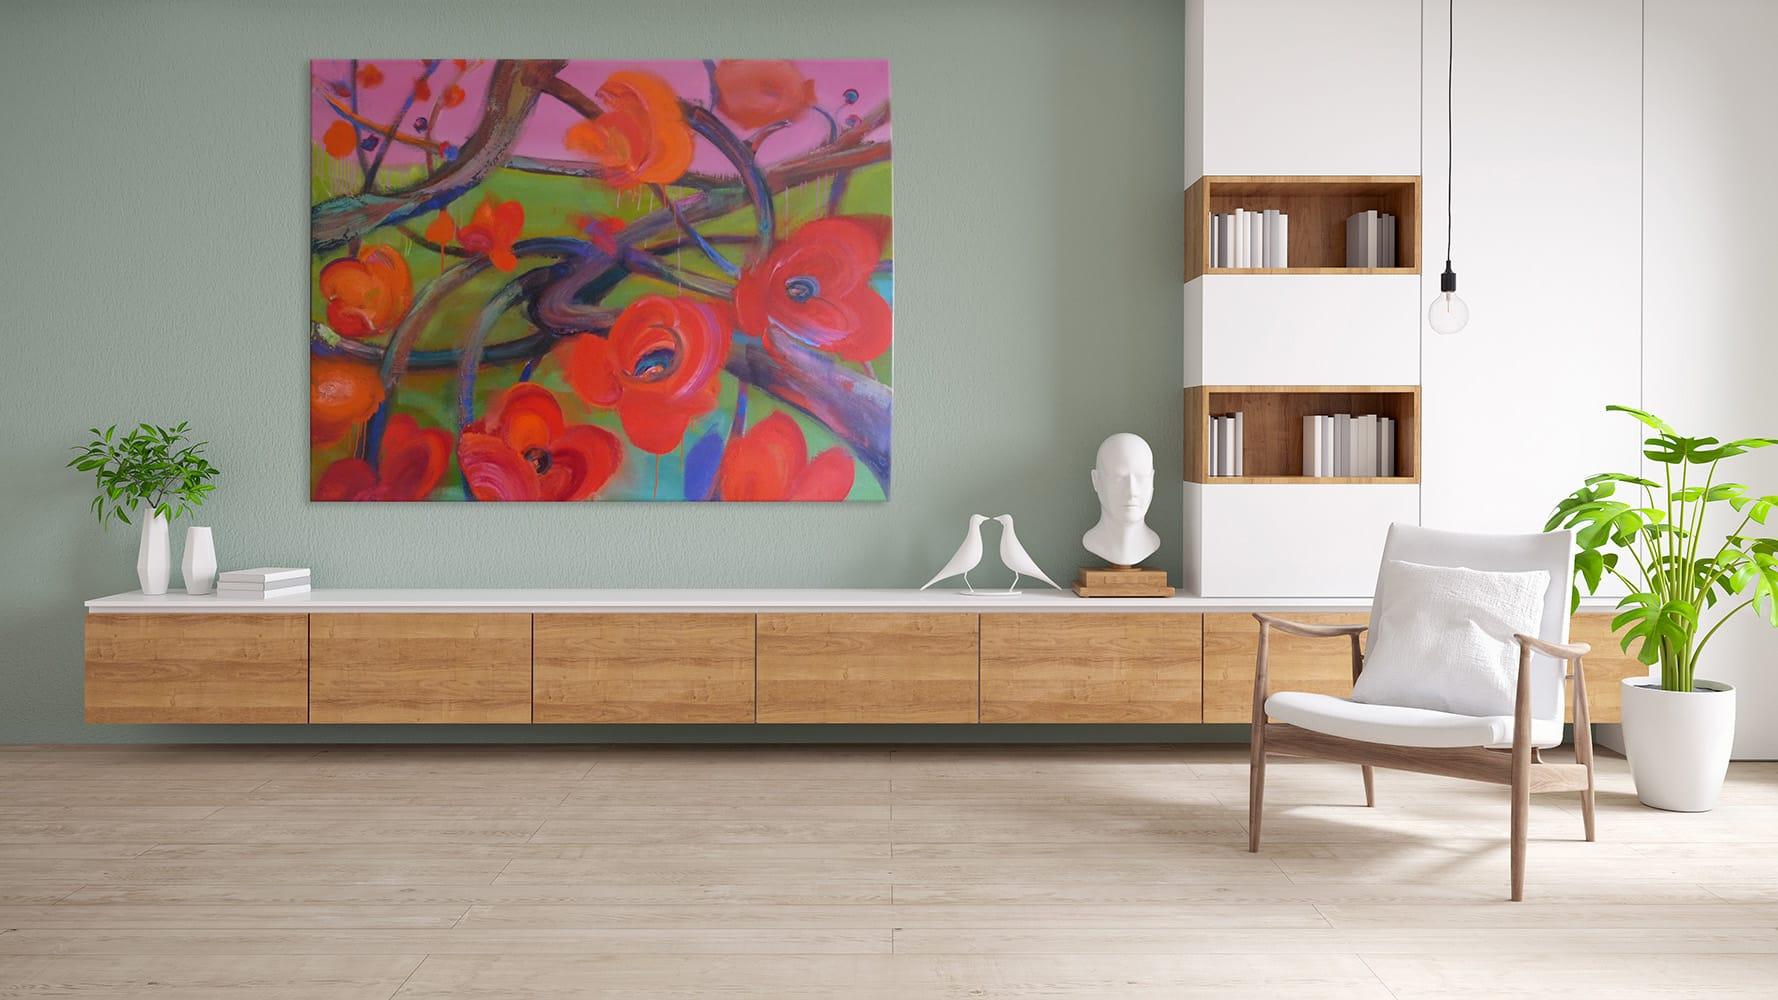 Papavera by Christophe Dupety - Colourful painting, flora, poppy flowers, red For Sale 1